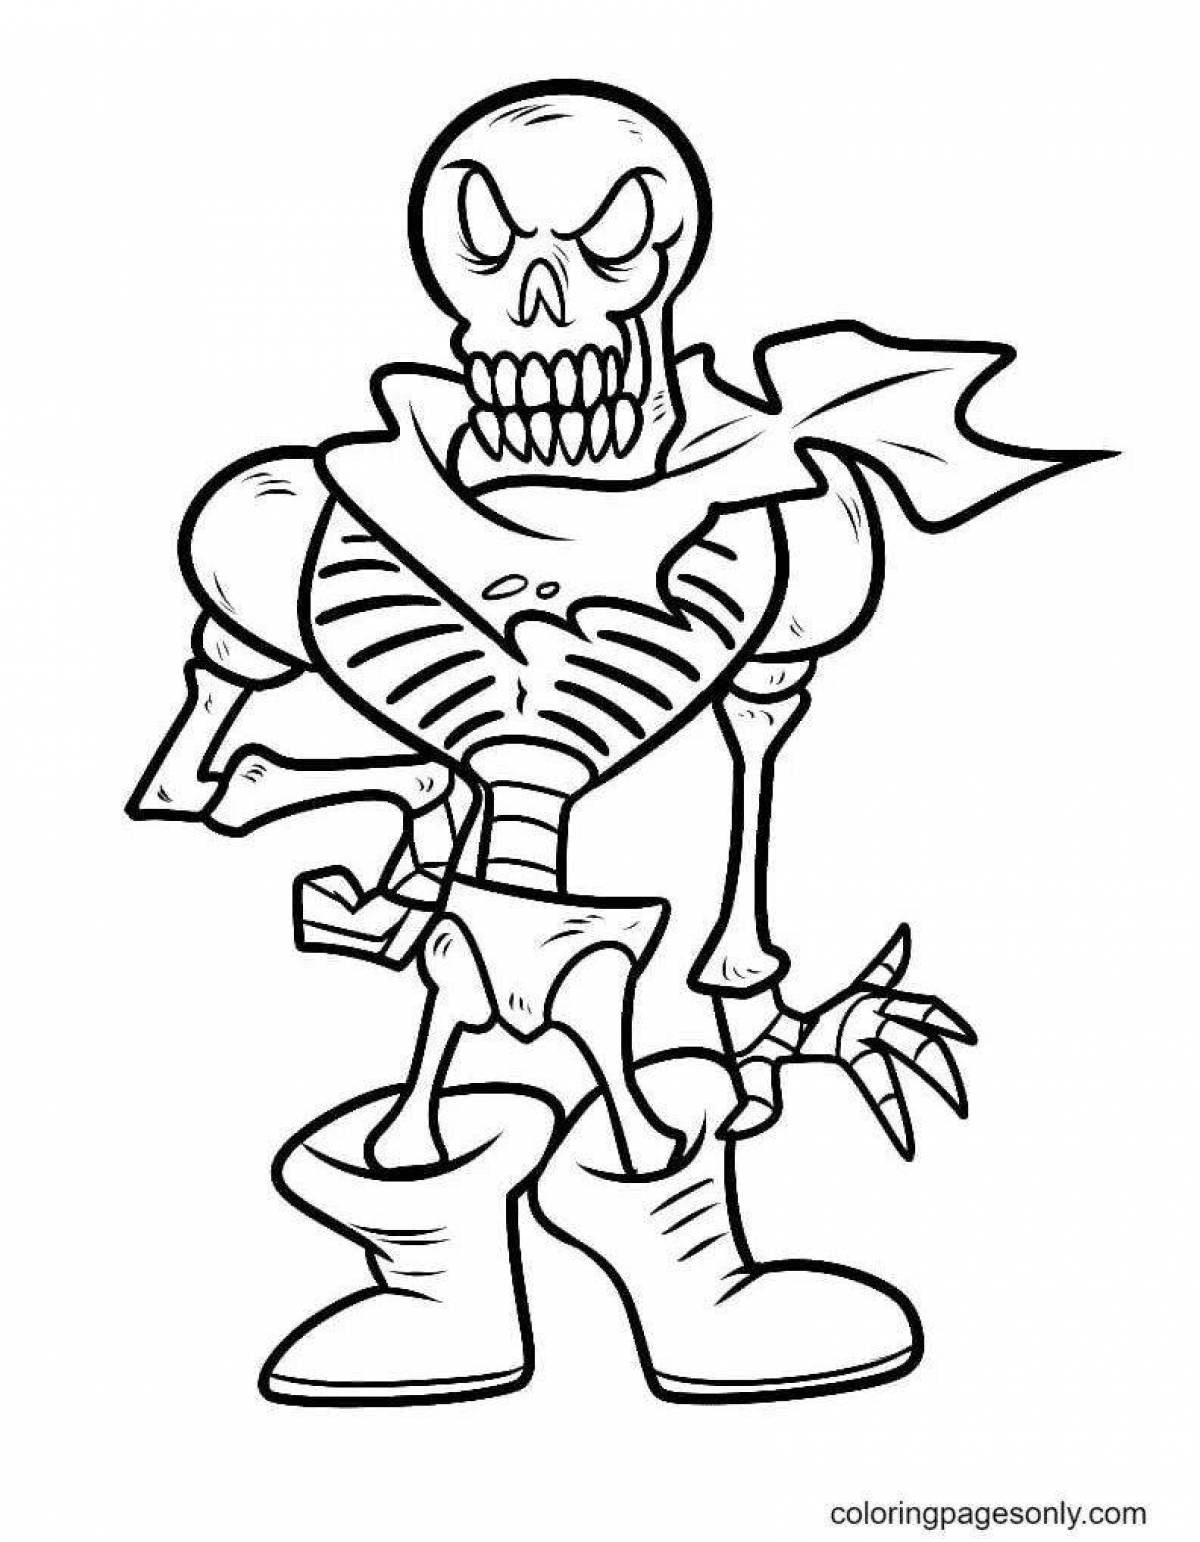 Coloring page dazzling papyrus